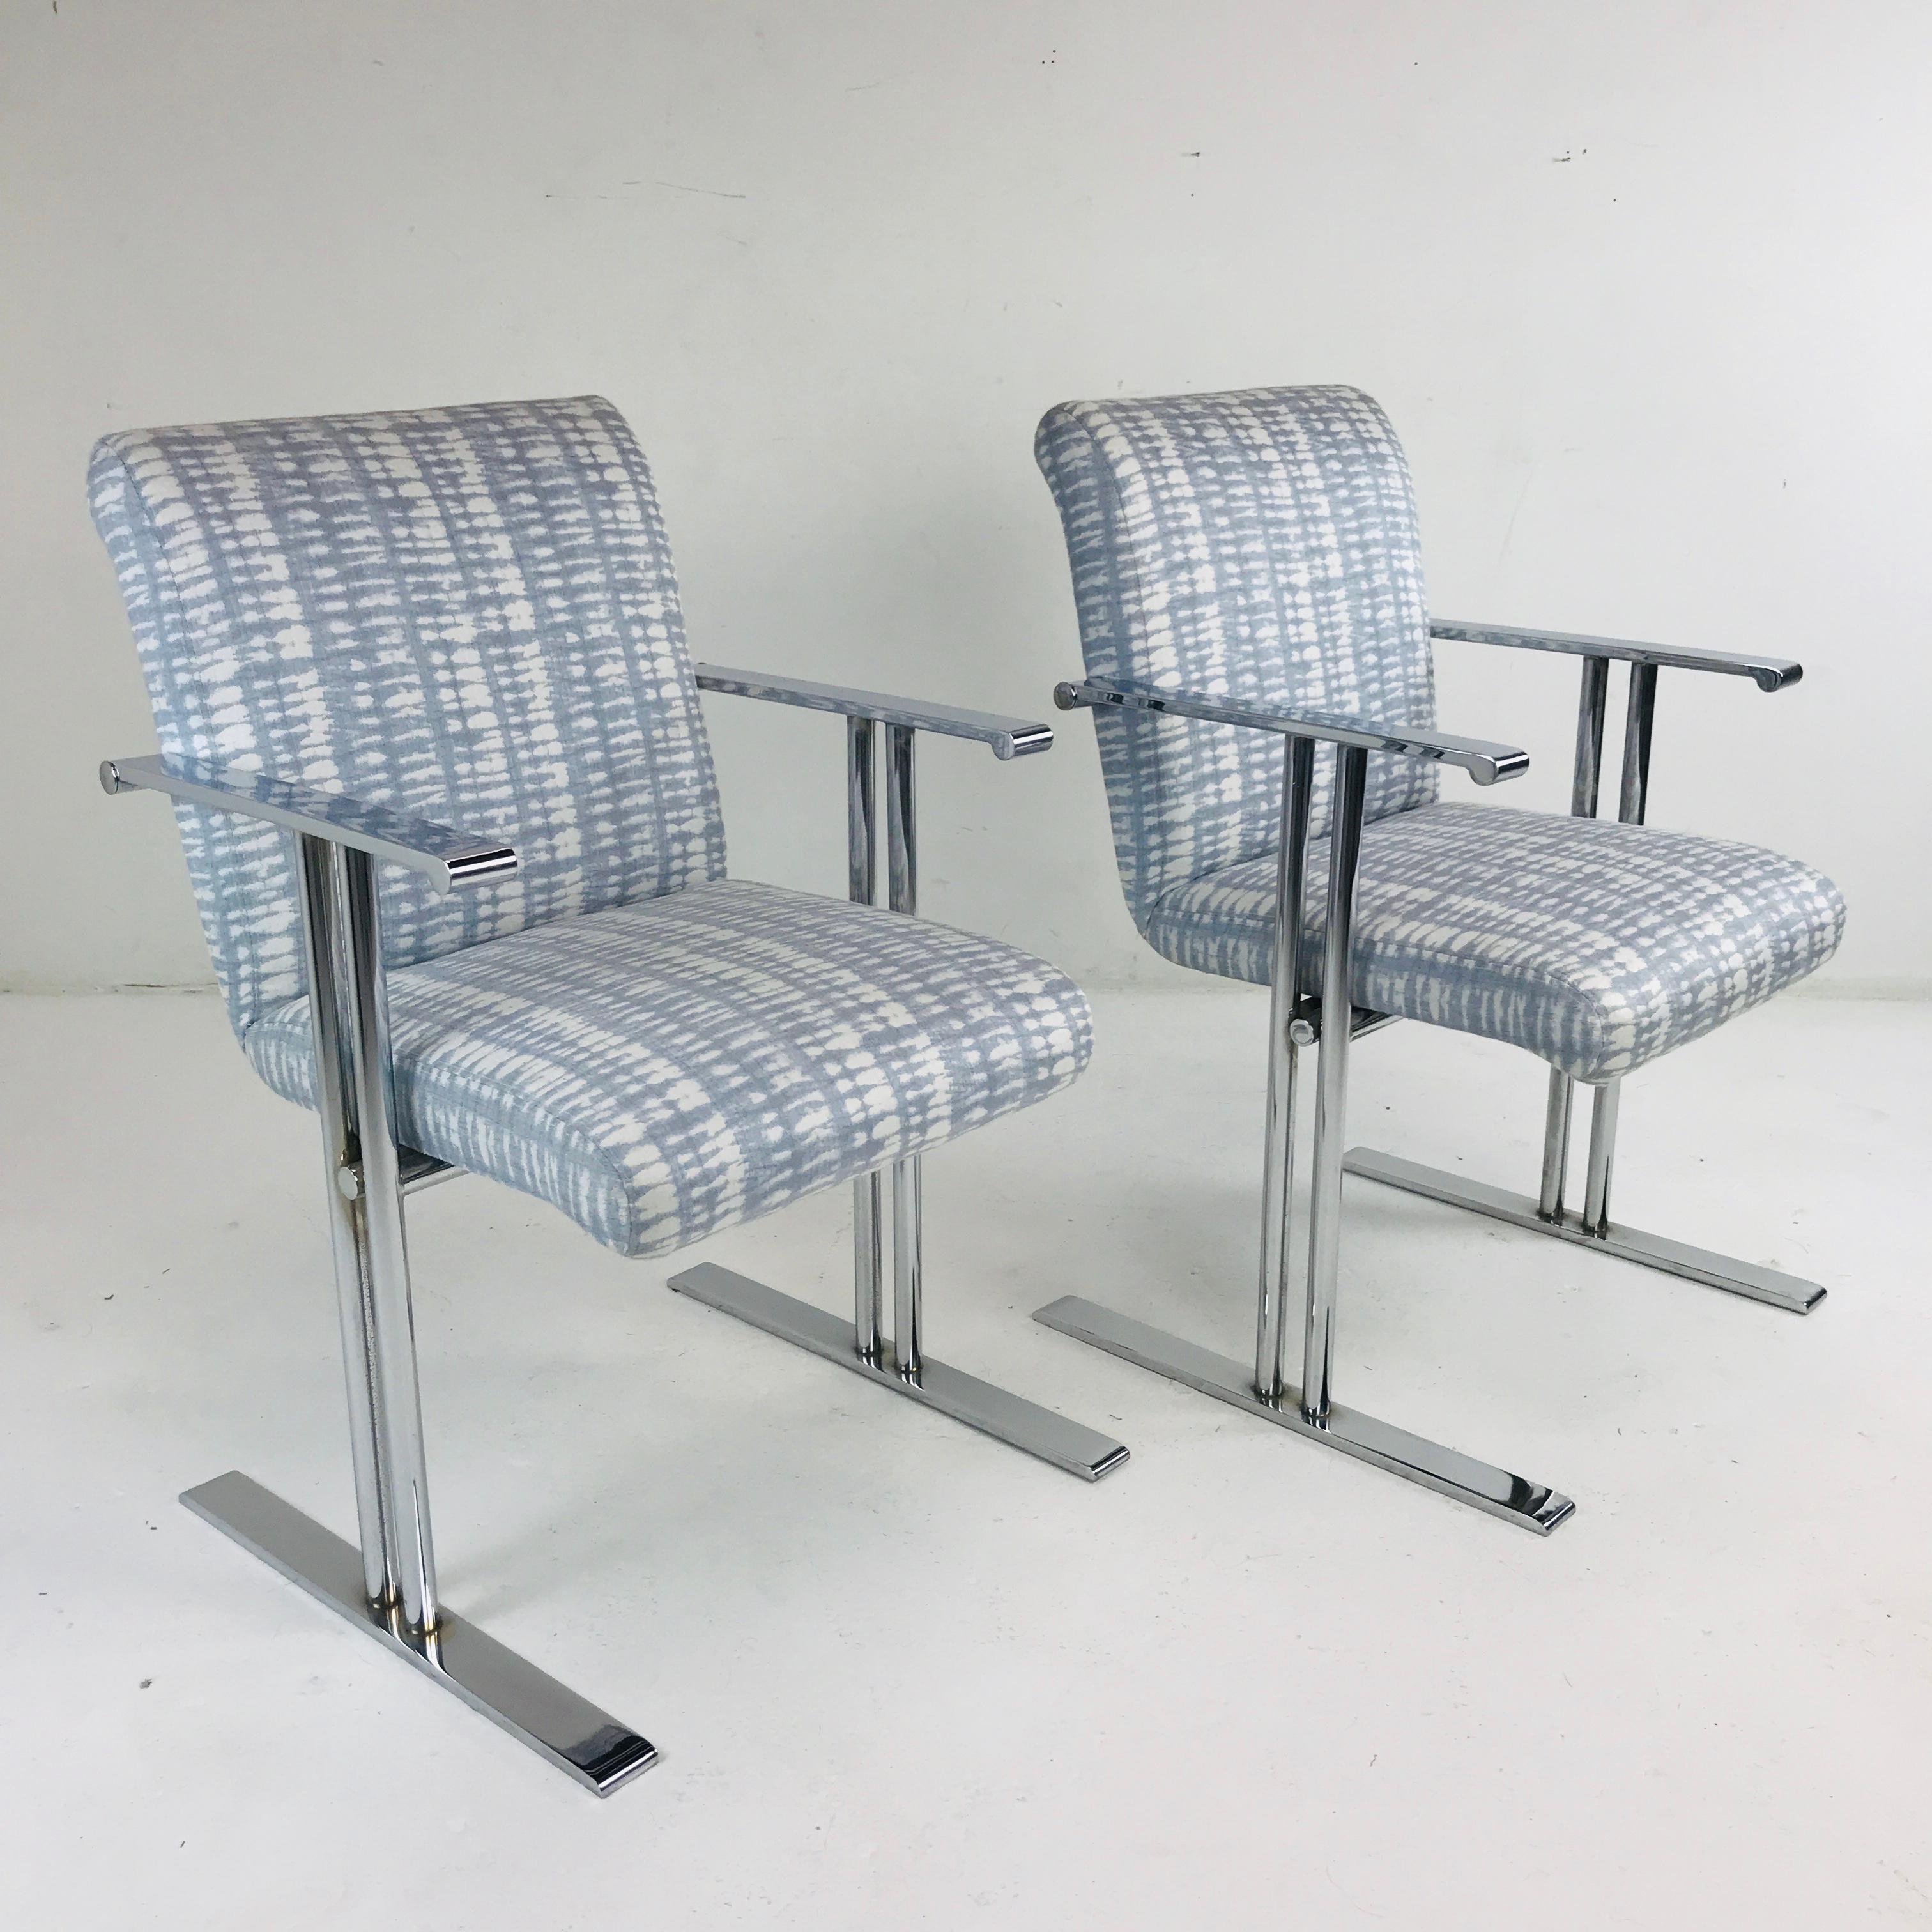 Pair of chrome armchairs by Directional with strong lines poised on steel bases, in the style of Milo Baughman. New upholstery.